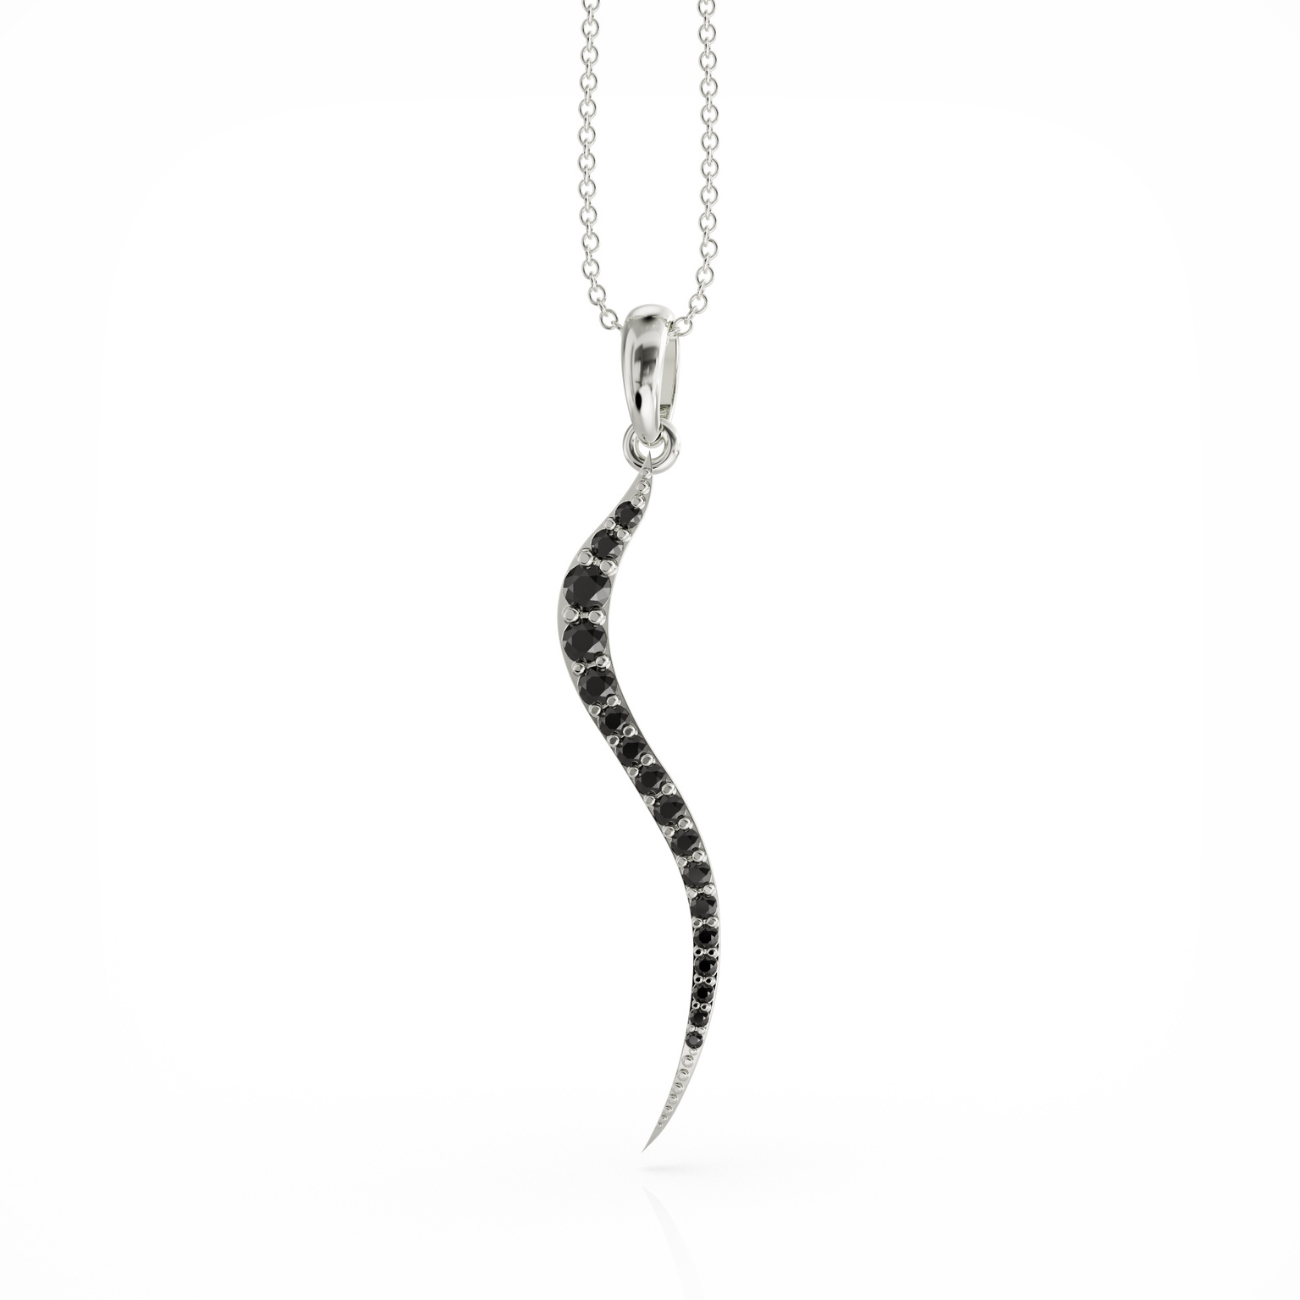 Swirl necklace silver and black cz